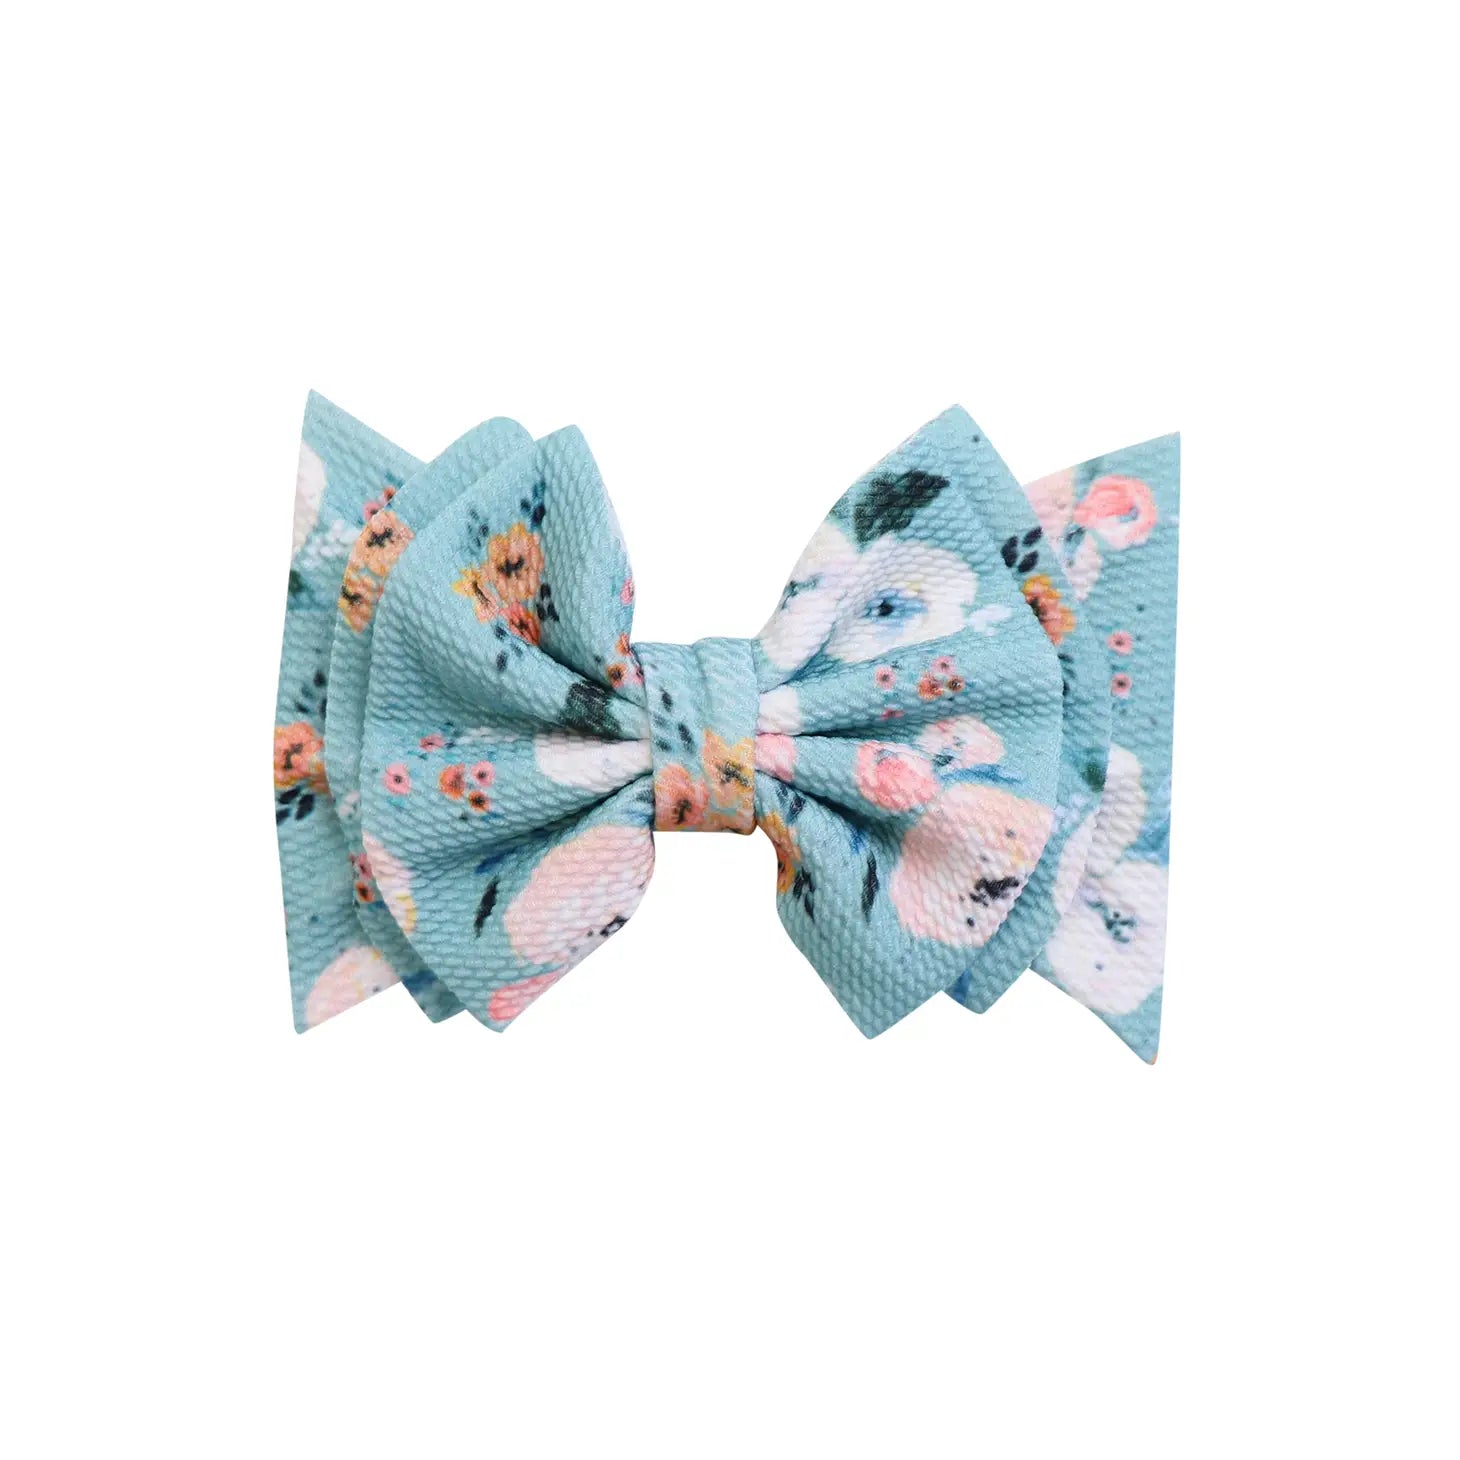 Picture of a big bow that is light blue with white, yellow, cream color flowers